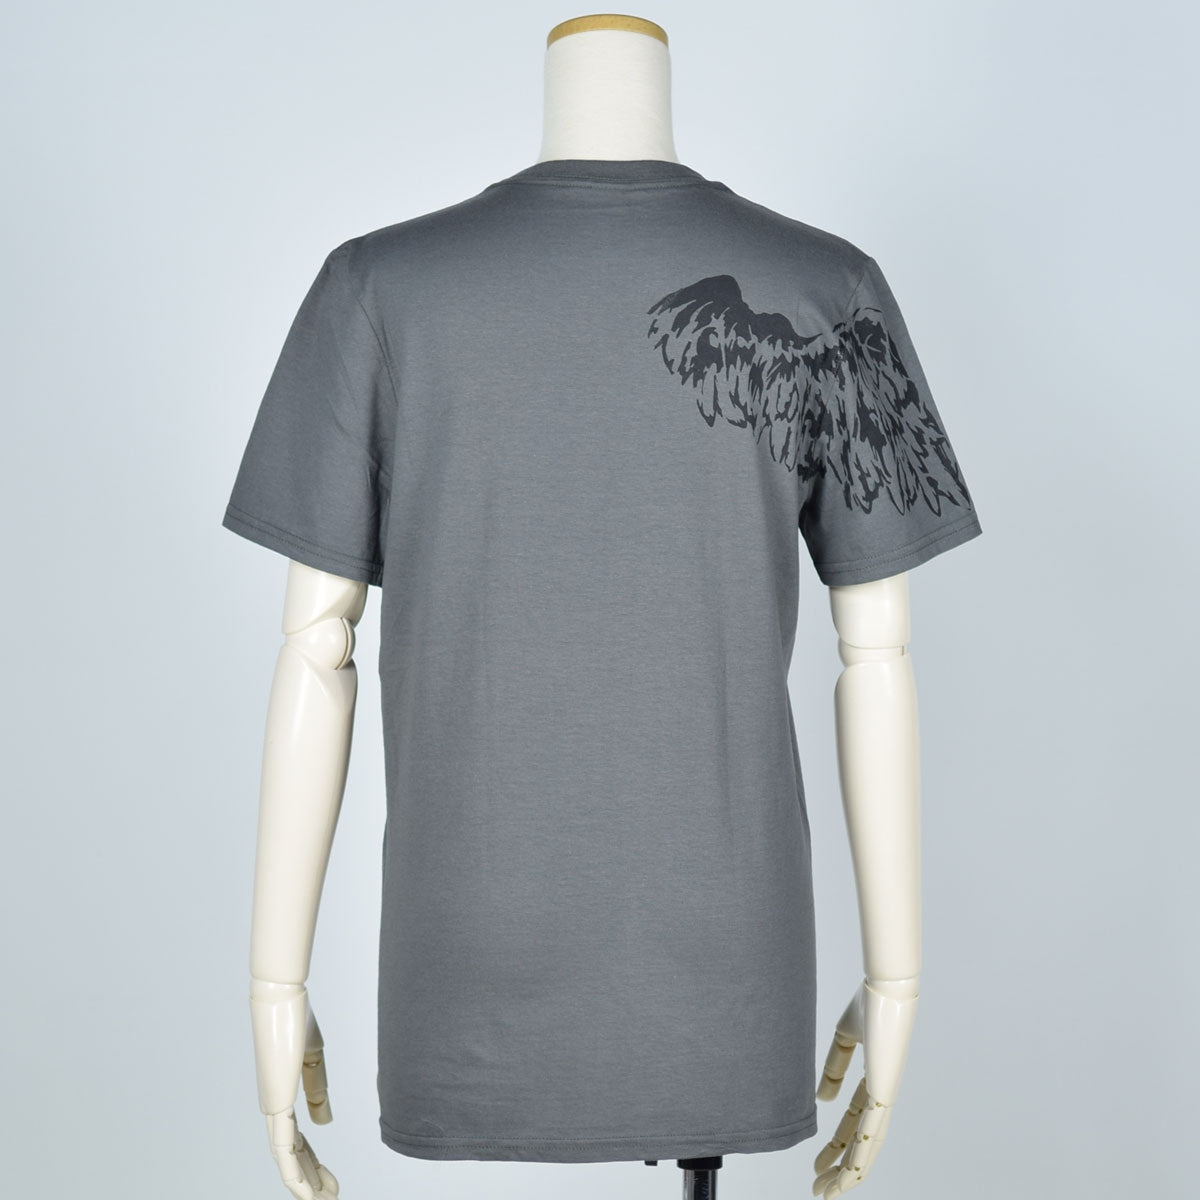 ONE WINGED ANGEL T-SH (3 sizes)